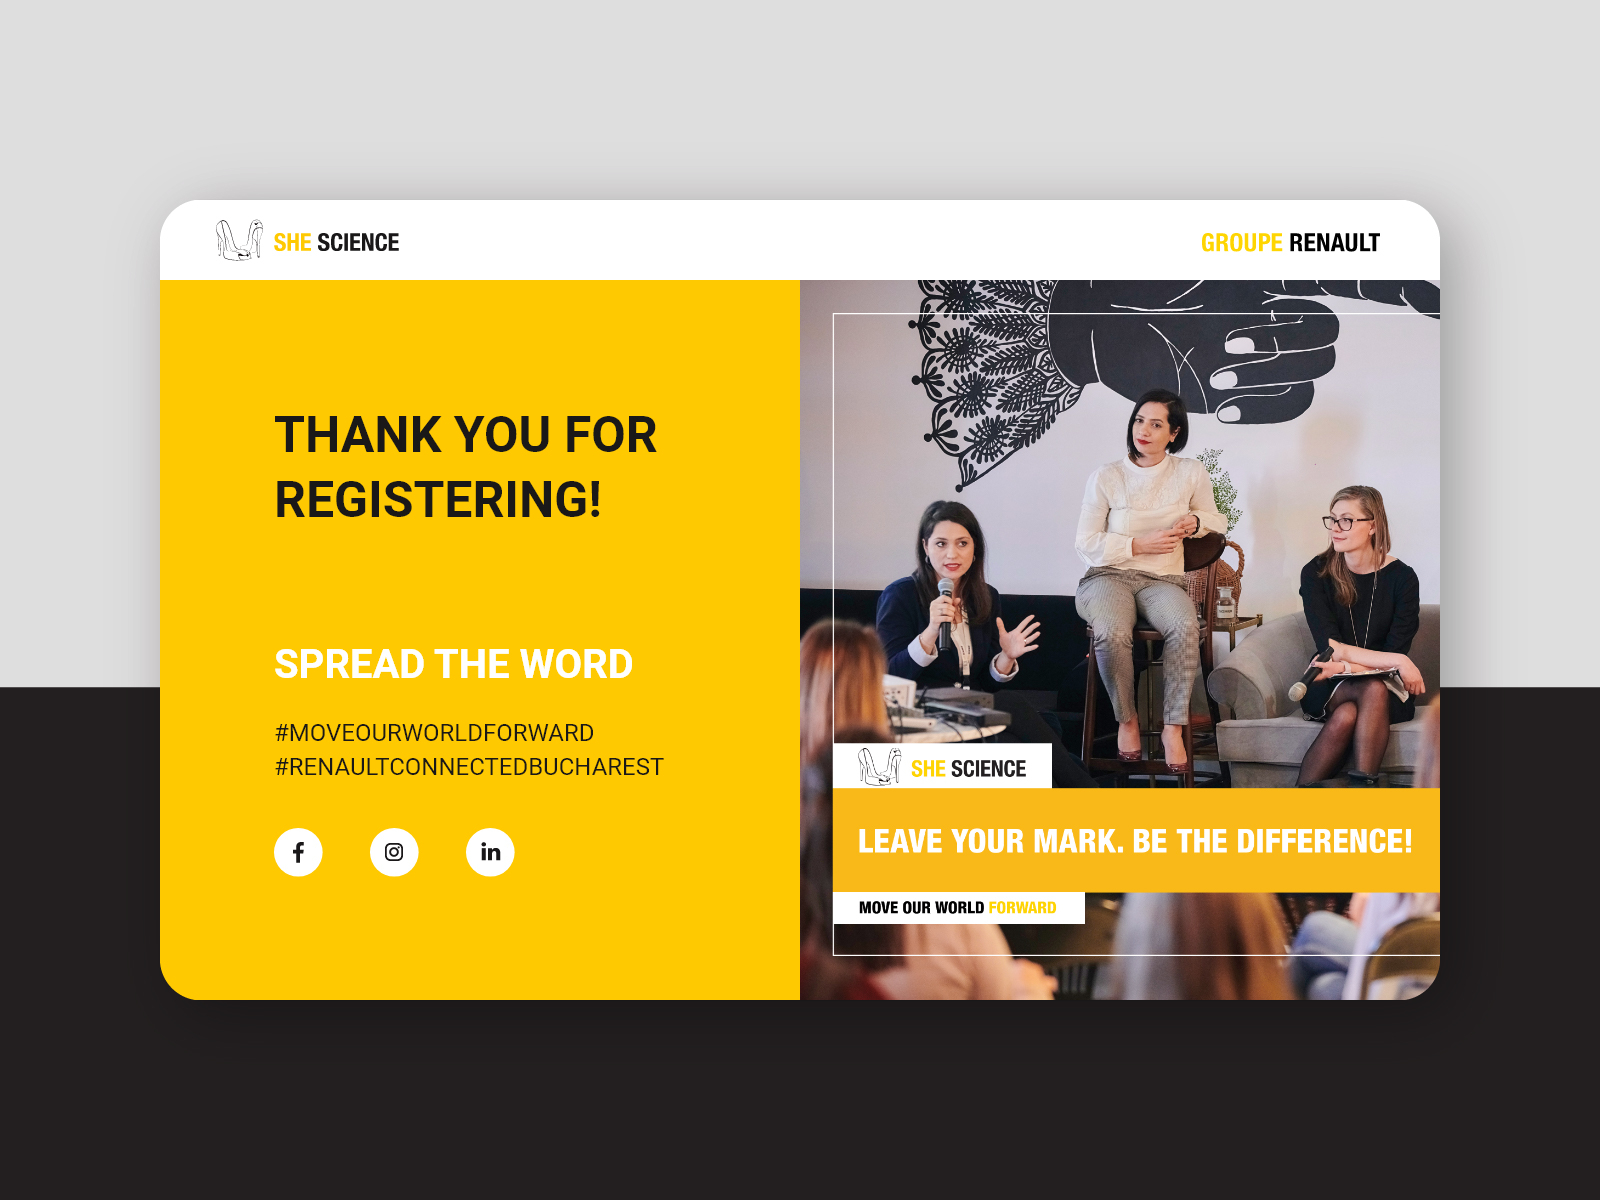 she-science-conference-thank-you-page-template-by-gyarfas-csilla-julia-on-dribbble